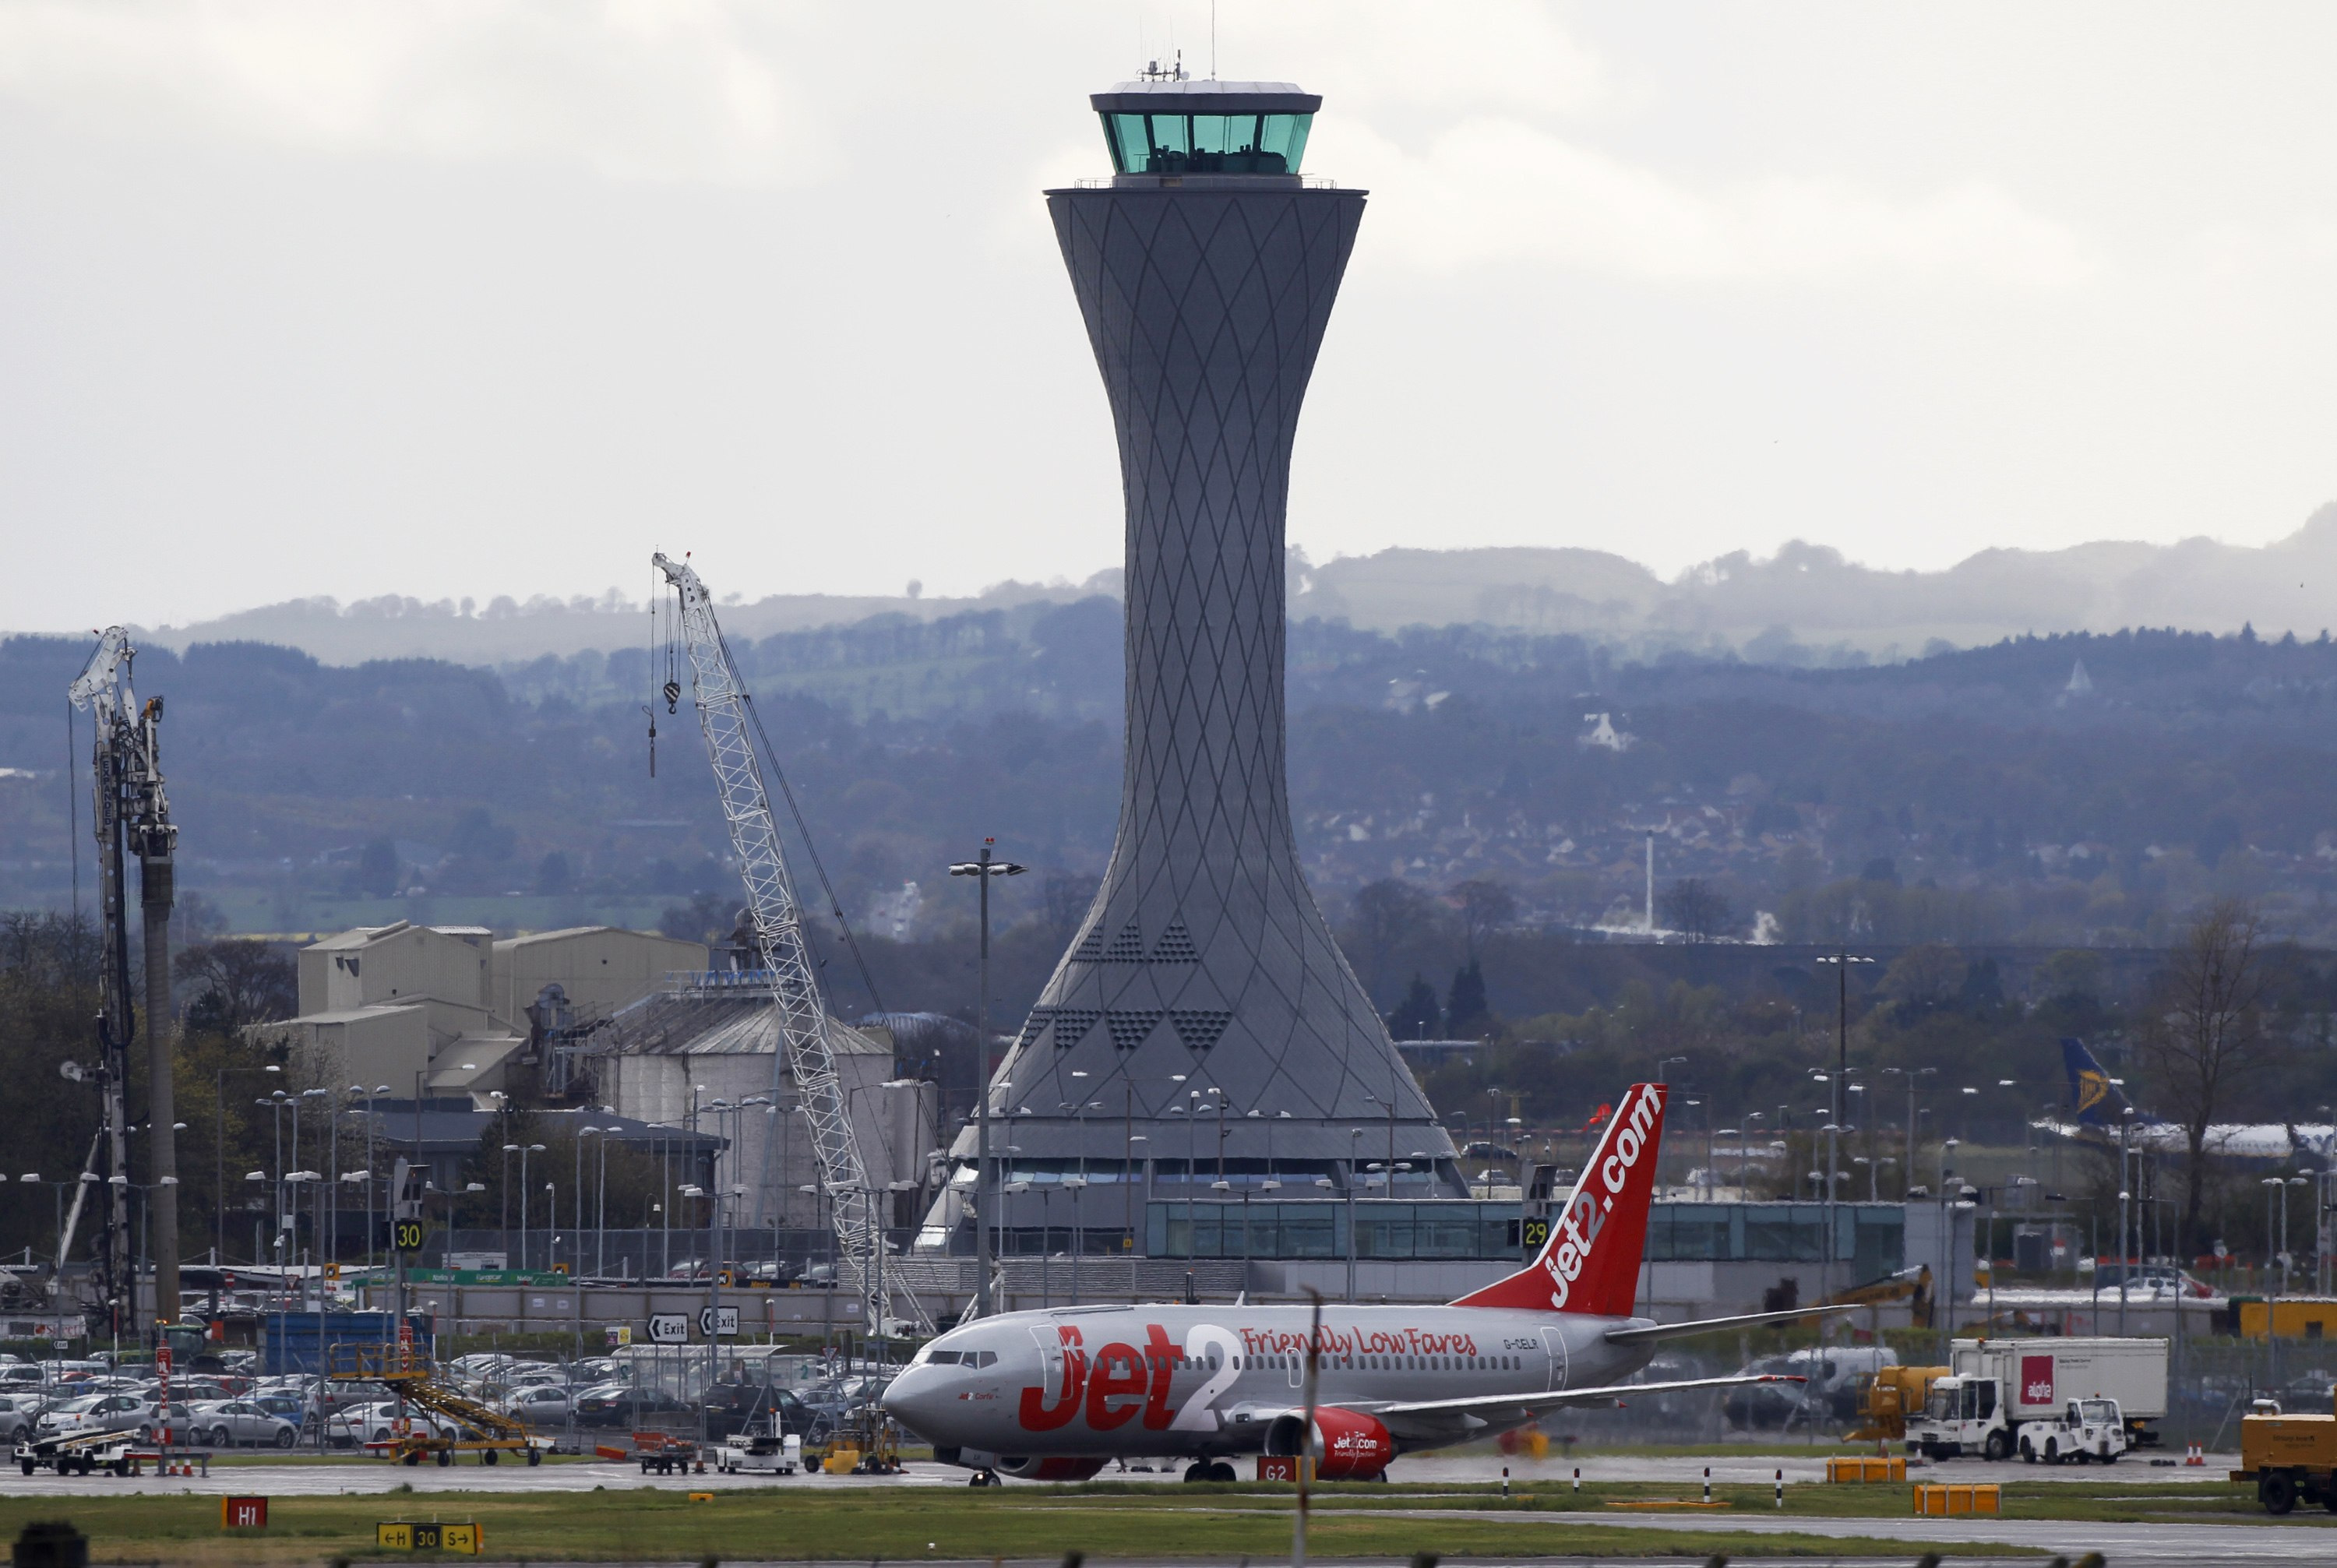 A aircraft taxis past the control tower at Edinburgh Airport in Scotland